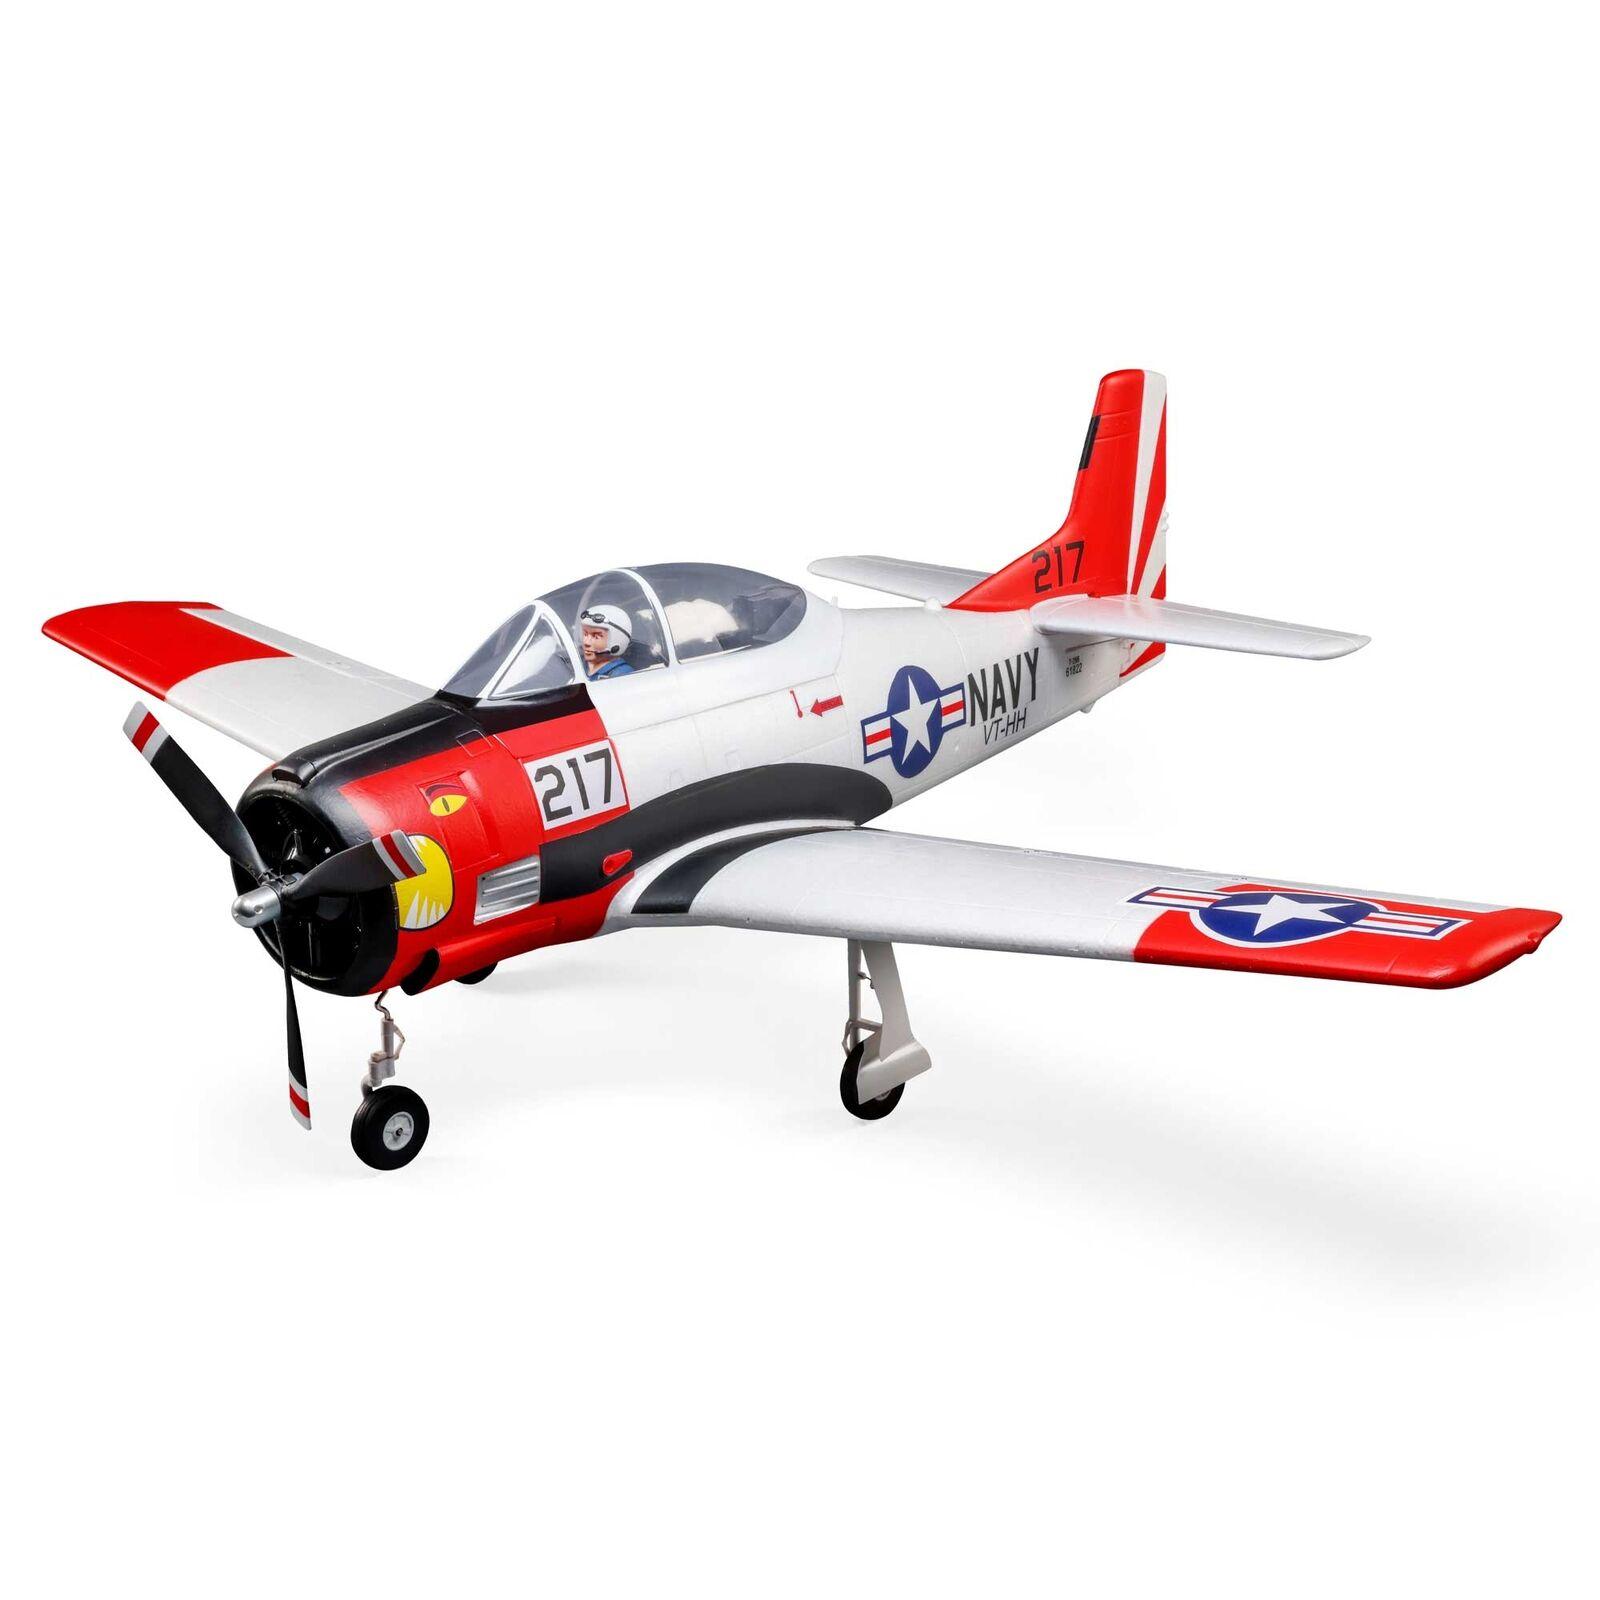 Rc Planes Online: Finding the Best Deals on RC Planes Online